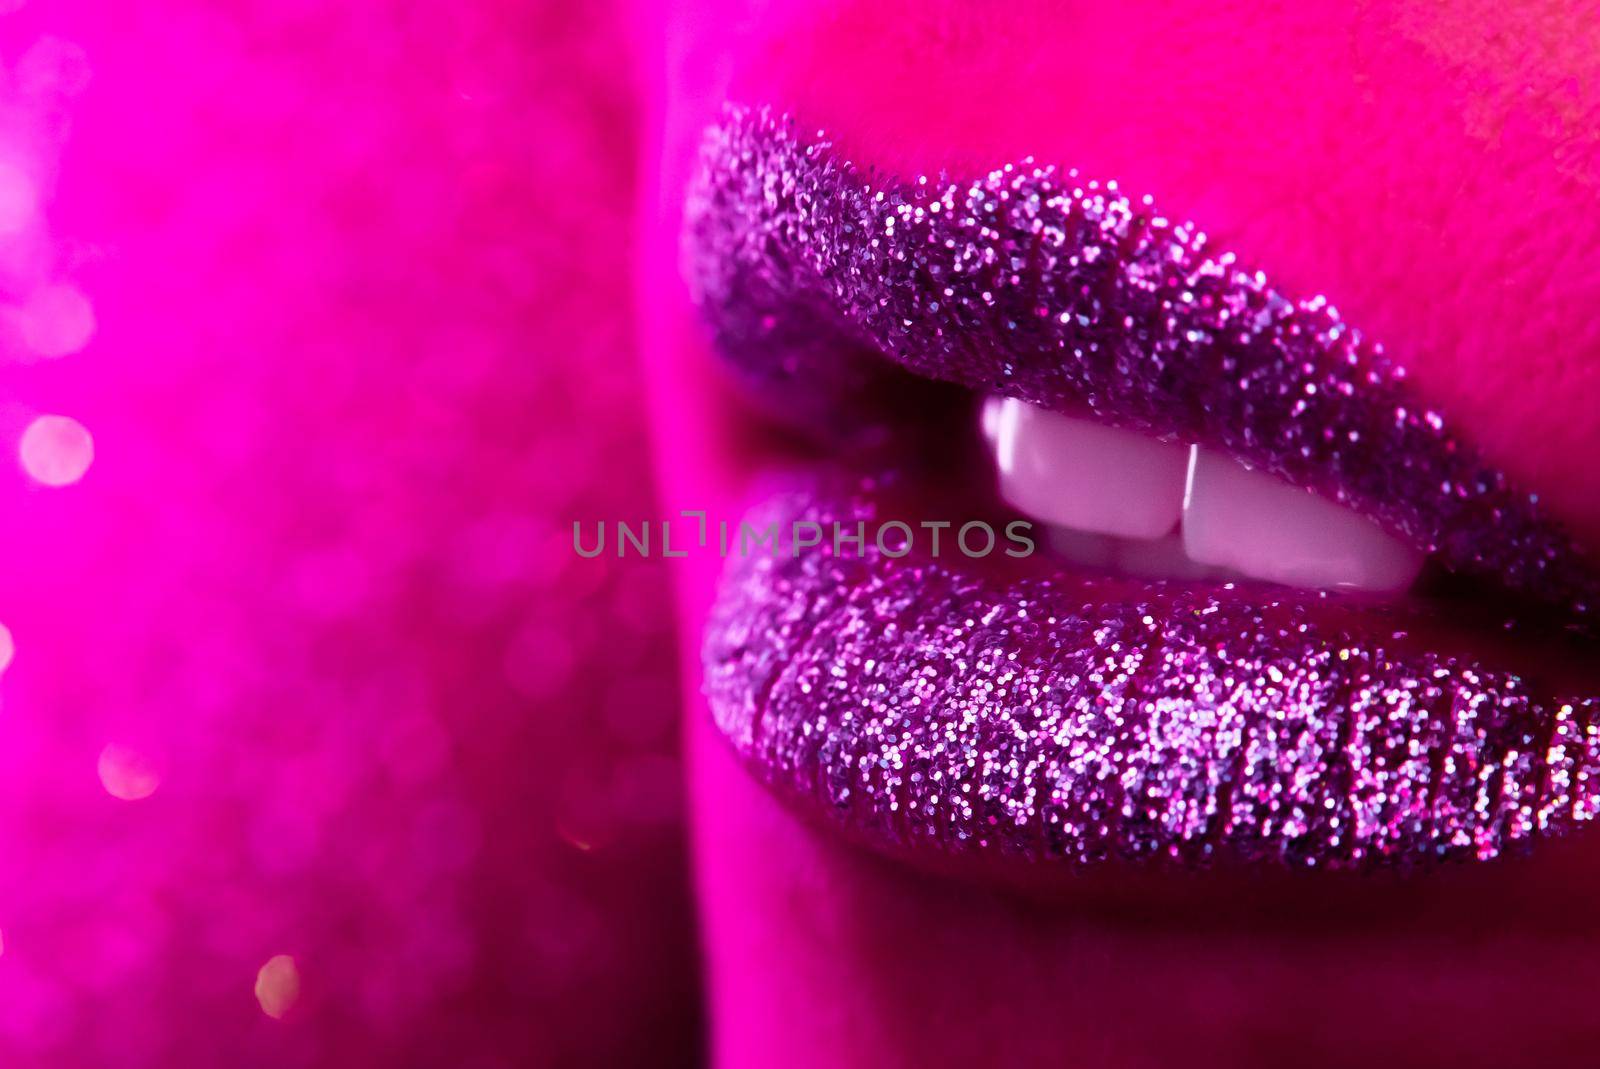 Fashion model with shiny sparkles on plump lips. Pink neon studio light. Macro view of woman with glamorous make-up. Nightlife, night club concept. Copy space. by kristina_kokhanova